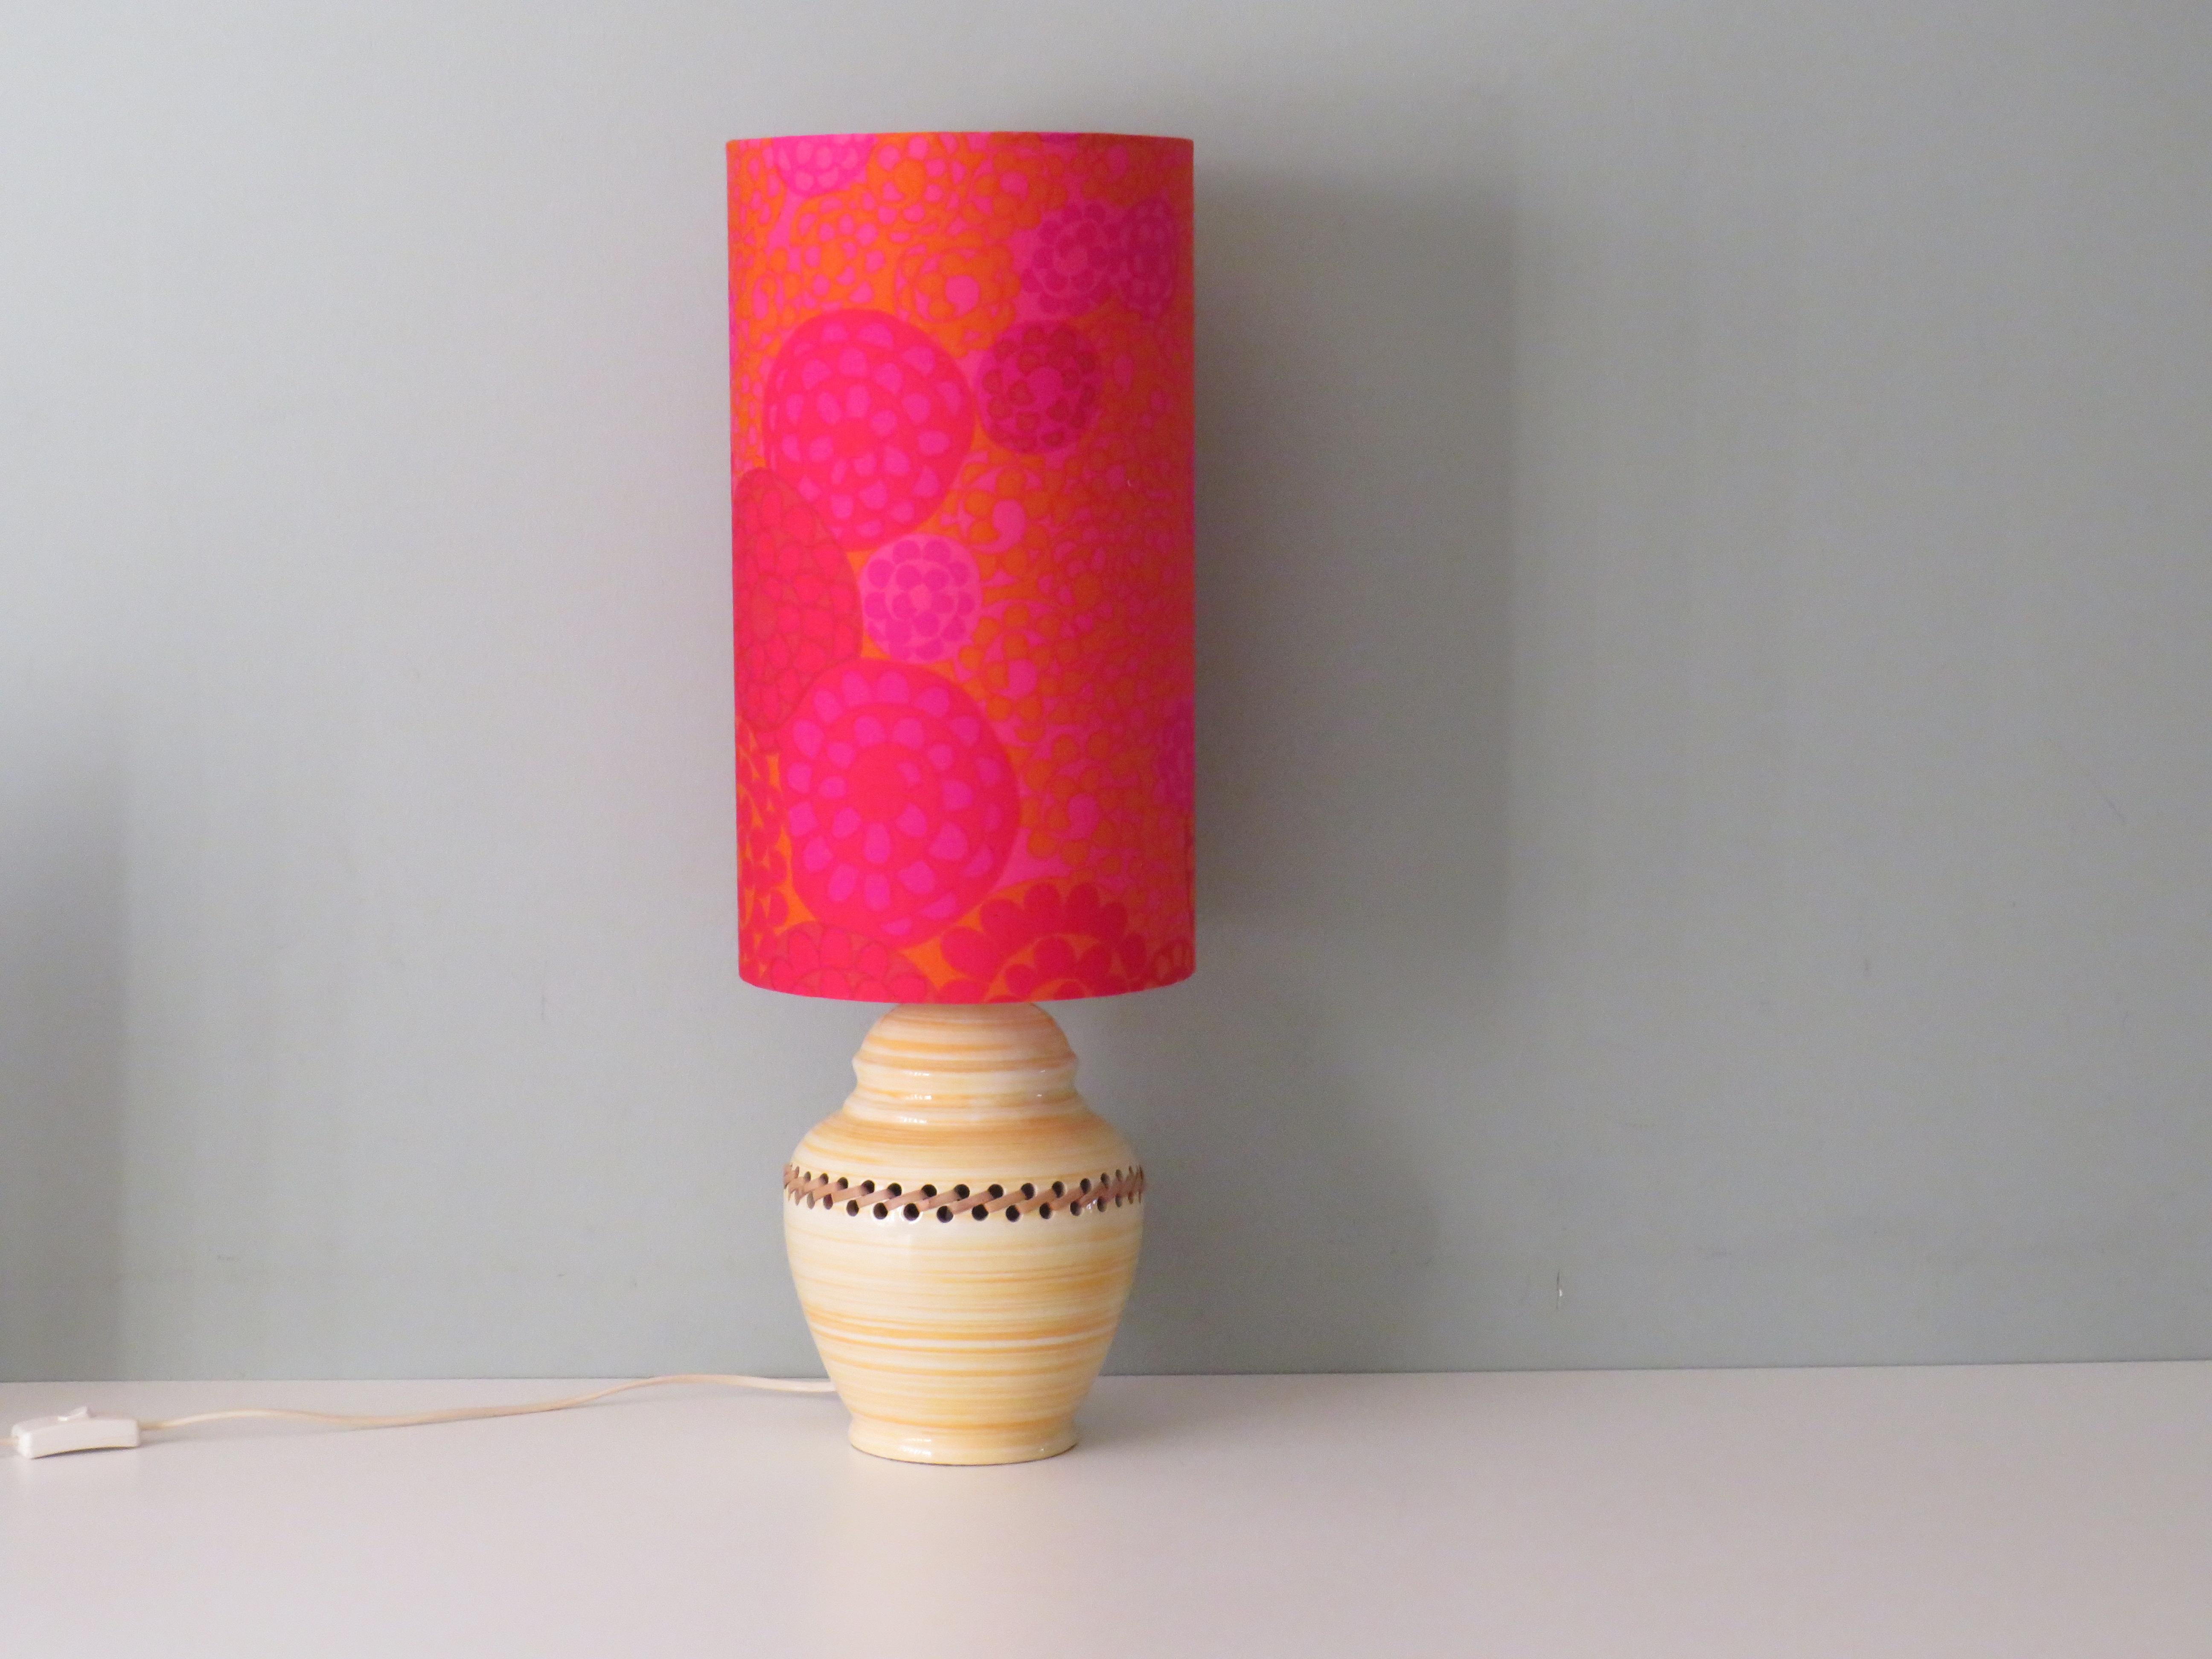 Lamp base of glazed ceramic with white and yellow stripe pattern, finished with rattan.
The lampshade is custom made from a vintage cotton fabric with a stylized floral design in shades of yellow, orange, pink and red.
The lampshade is 40 cm high